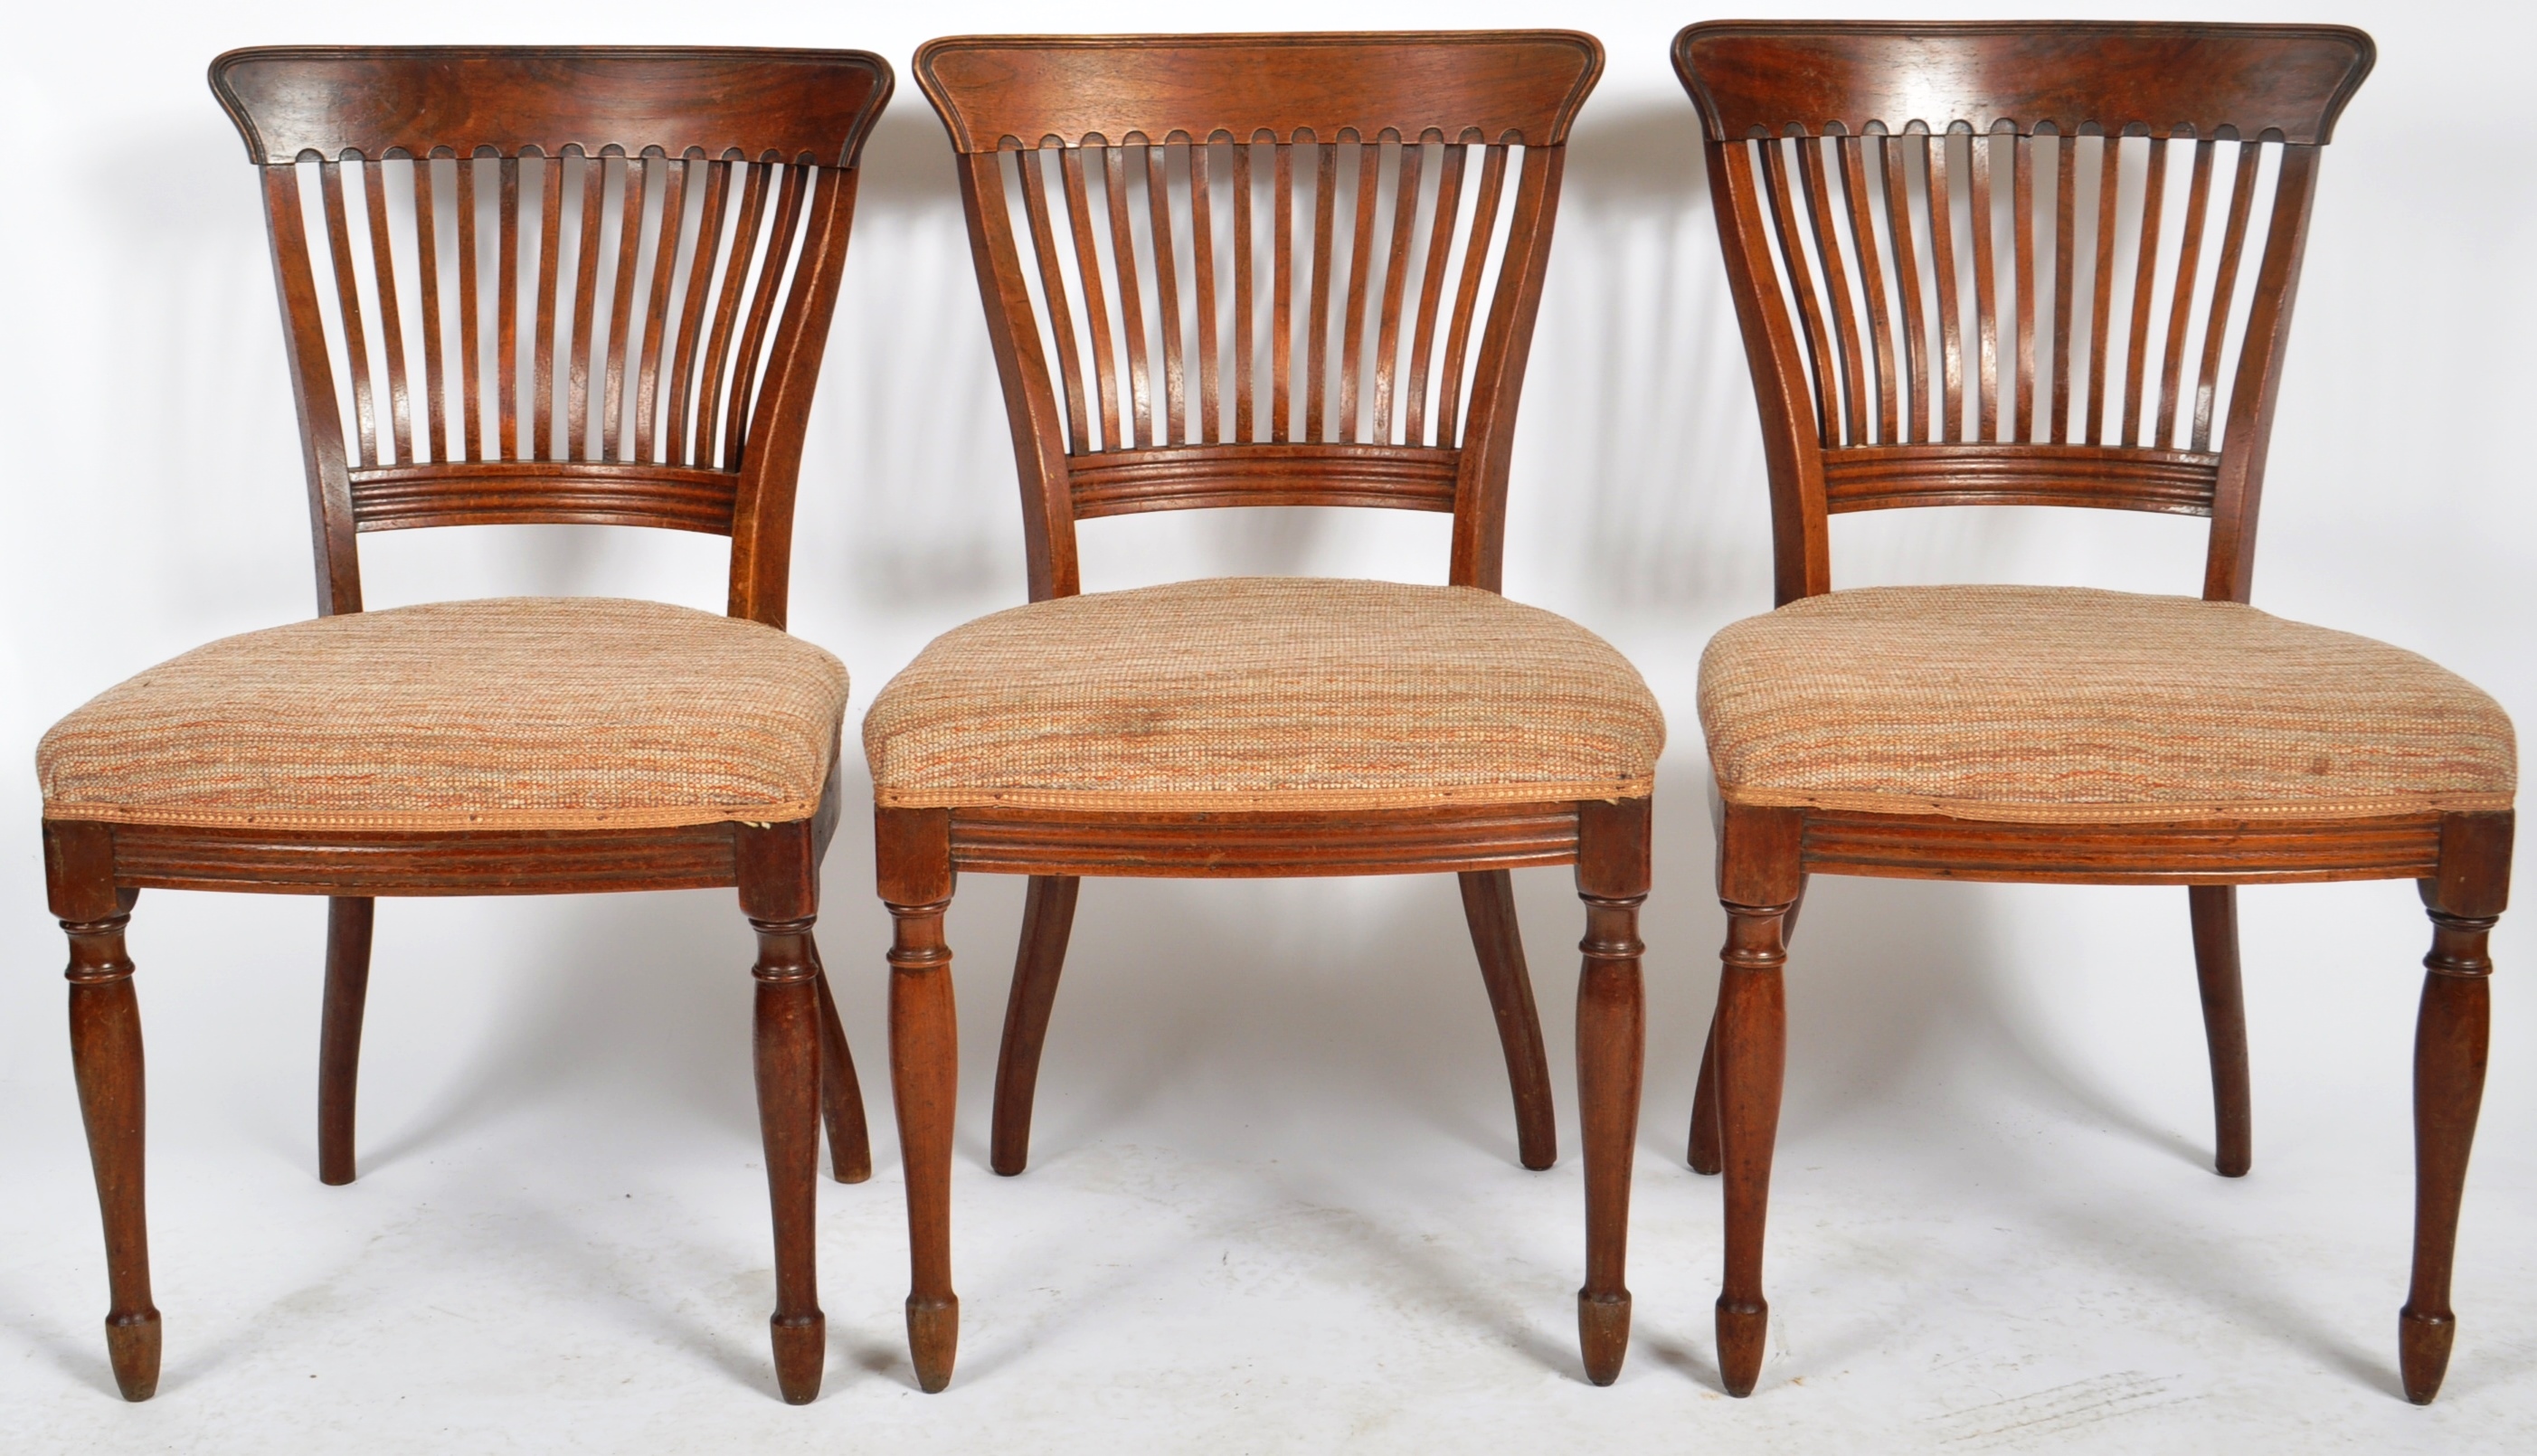 SET OF EW GODWIN FOR JAMES PEDDLE DINING CHAIRS - Image 2 of 6